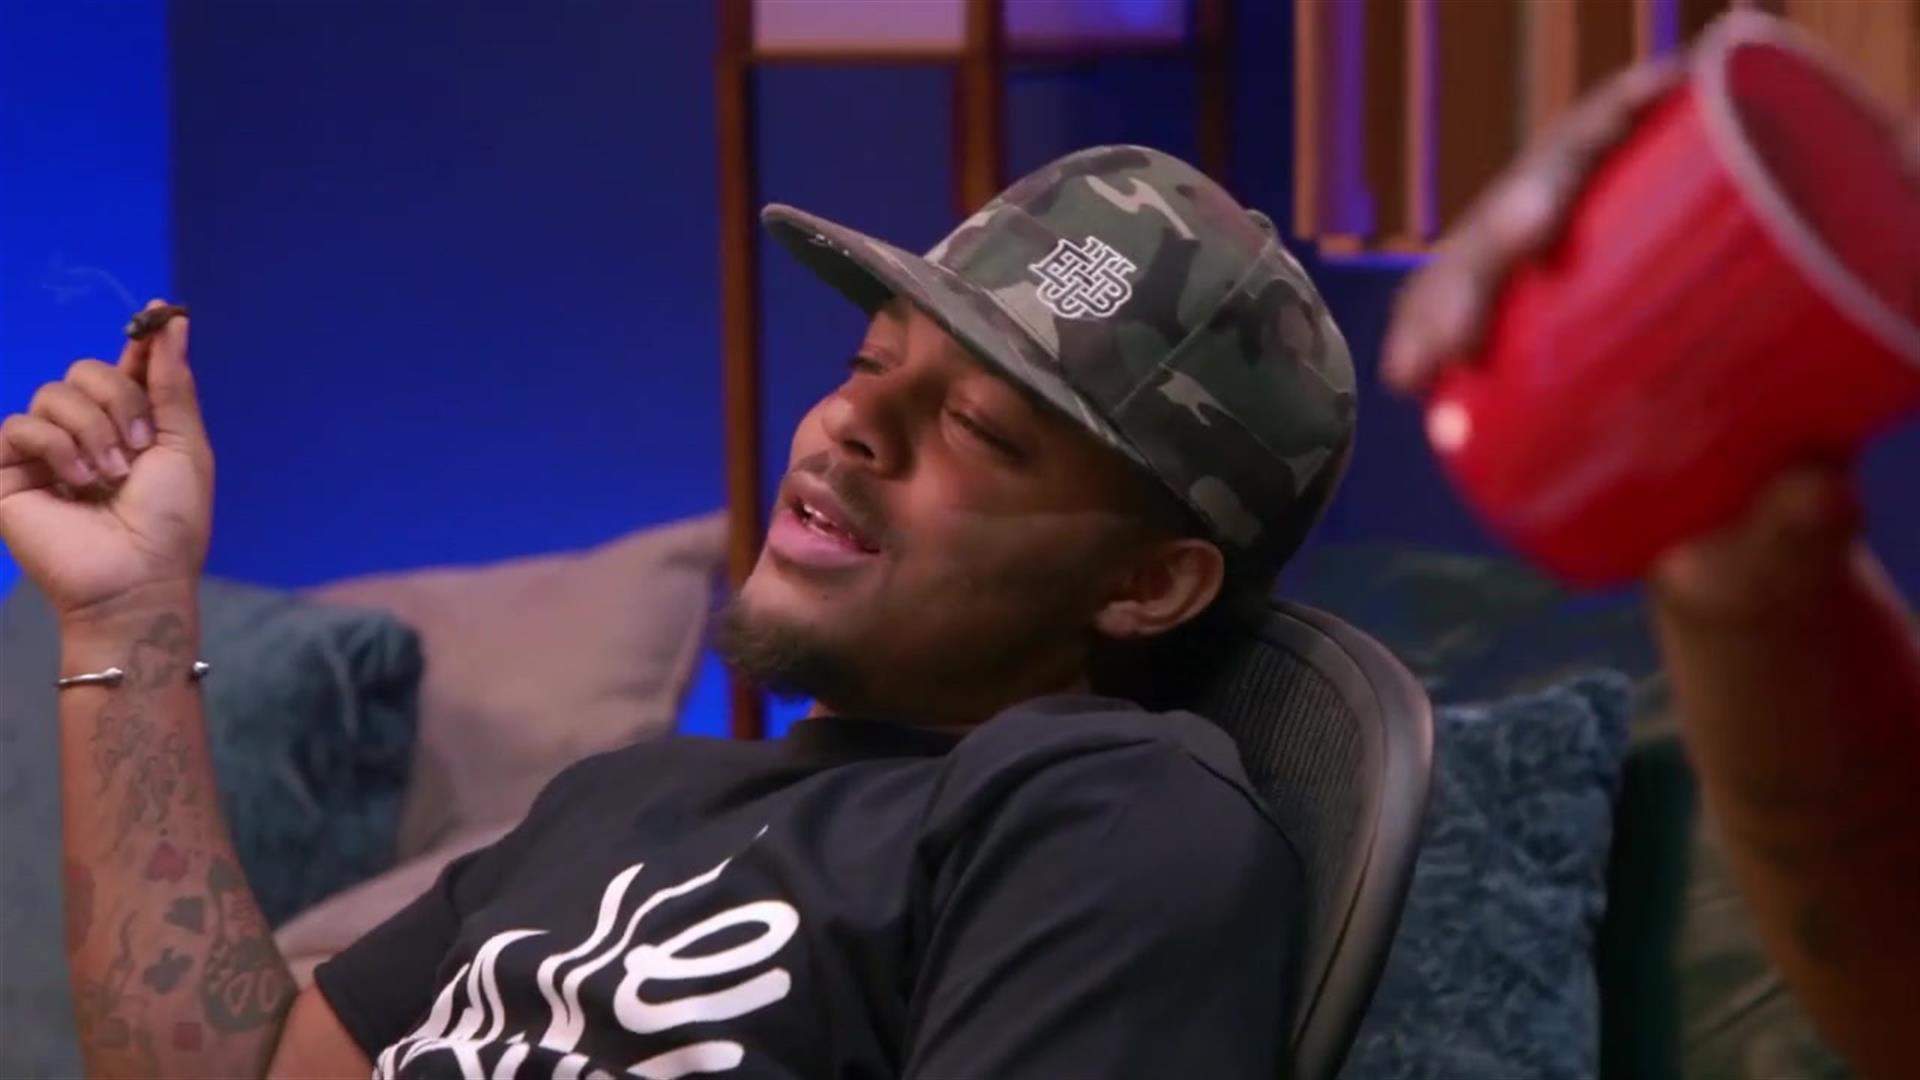 Watch Bow and Pimpin' Talk Love and Relationships | Growing Up Hip Hop: Atlanta Video Extras